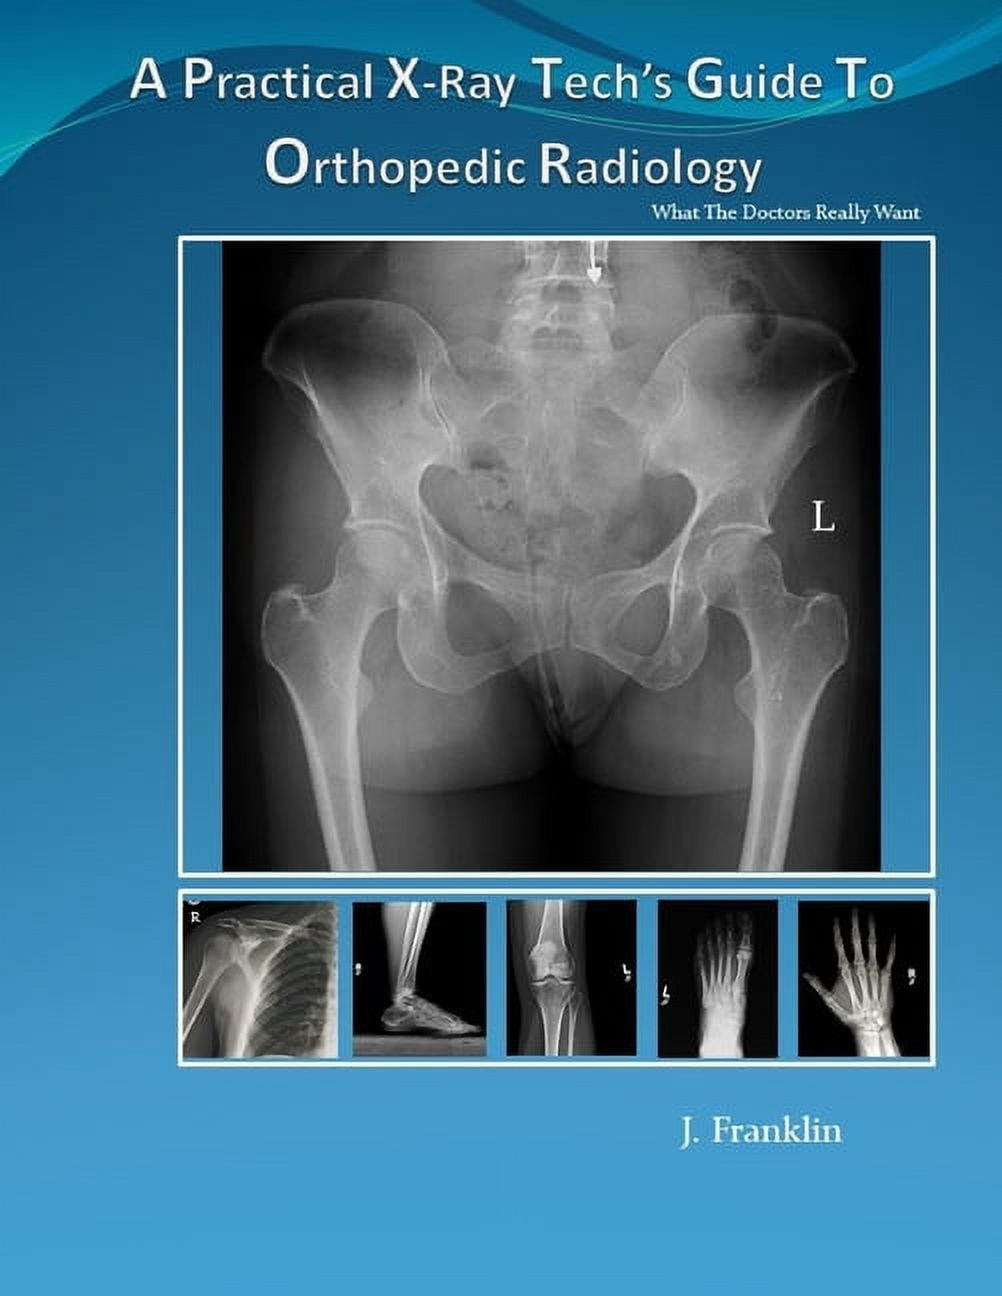 want　Practical　Tech's　Radiology:　(Paperback)　What　Guide　(Series　Orthopedic　To　A　X-Ray　really　Doctors　Radiology　the　#1)